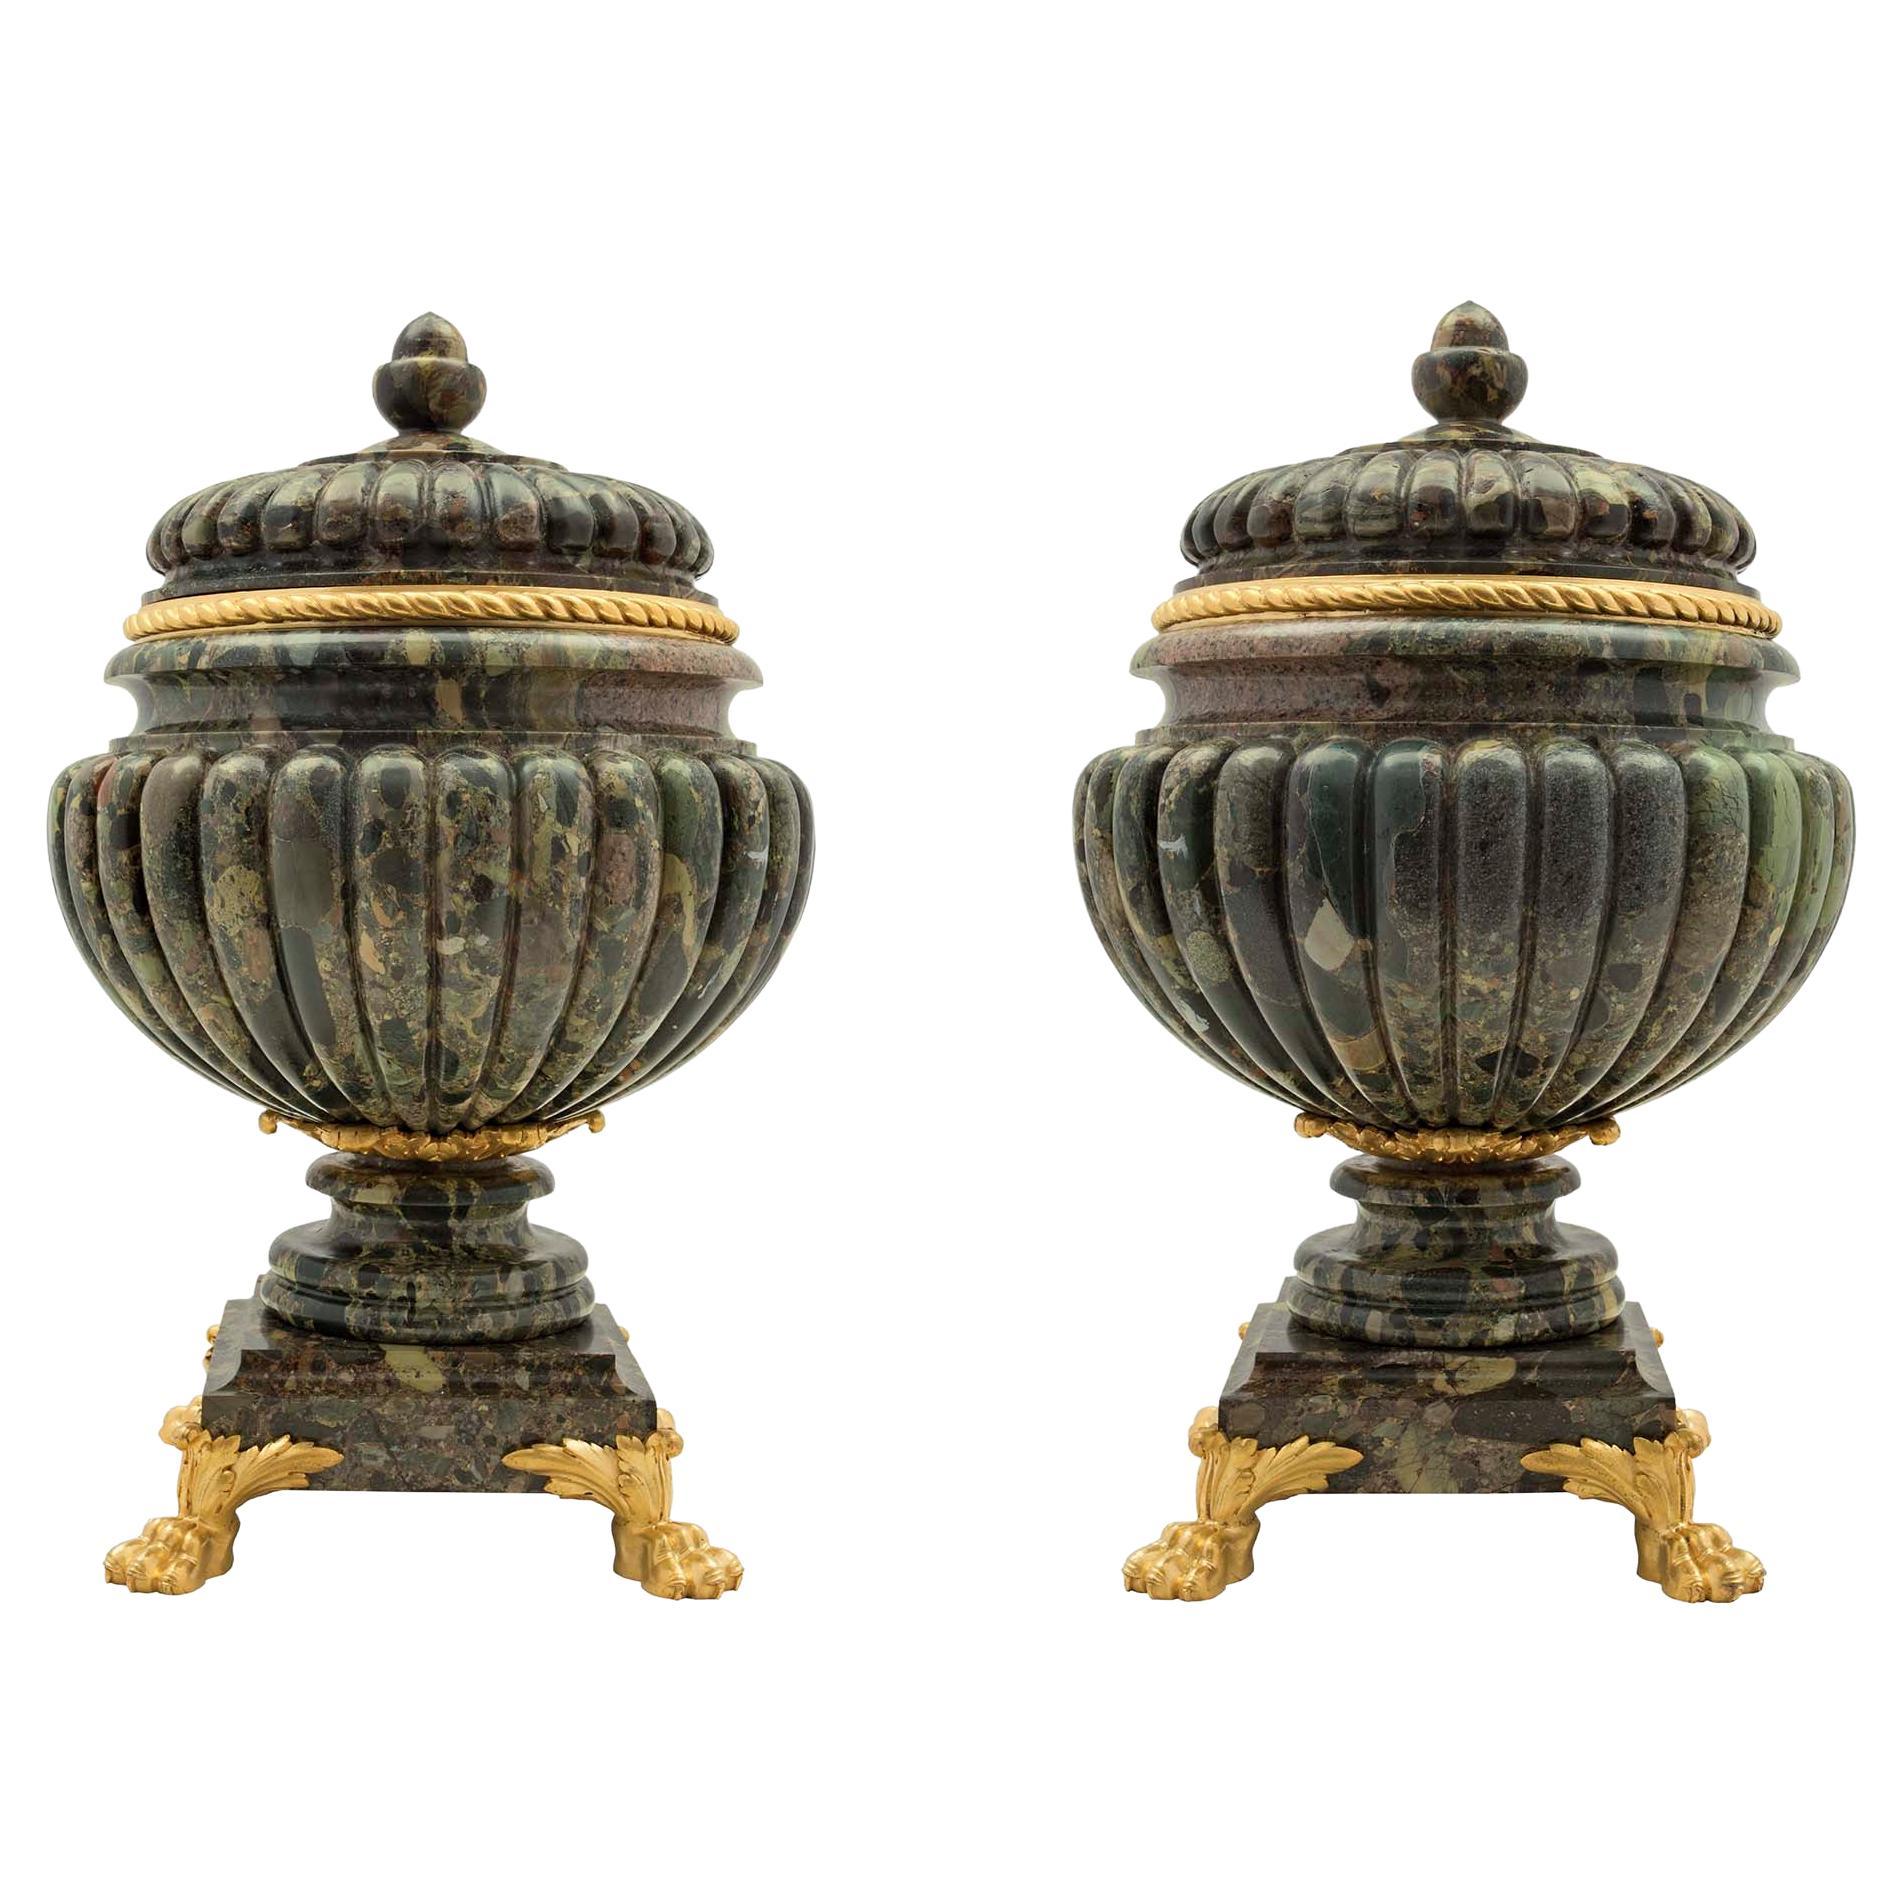 Pair of French 19th Century Neoclassical Style Marble and Ormolu Urns